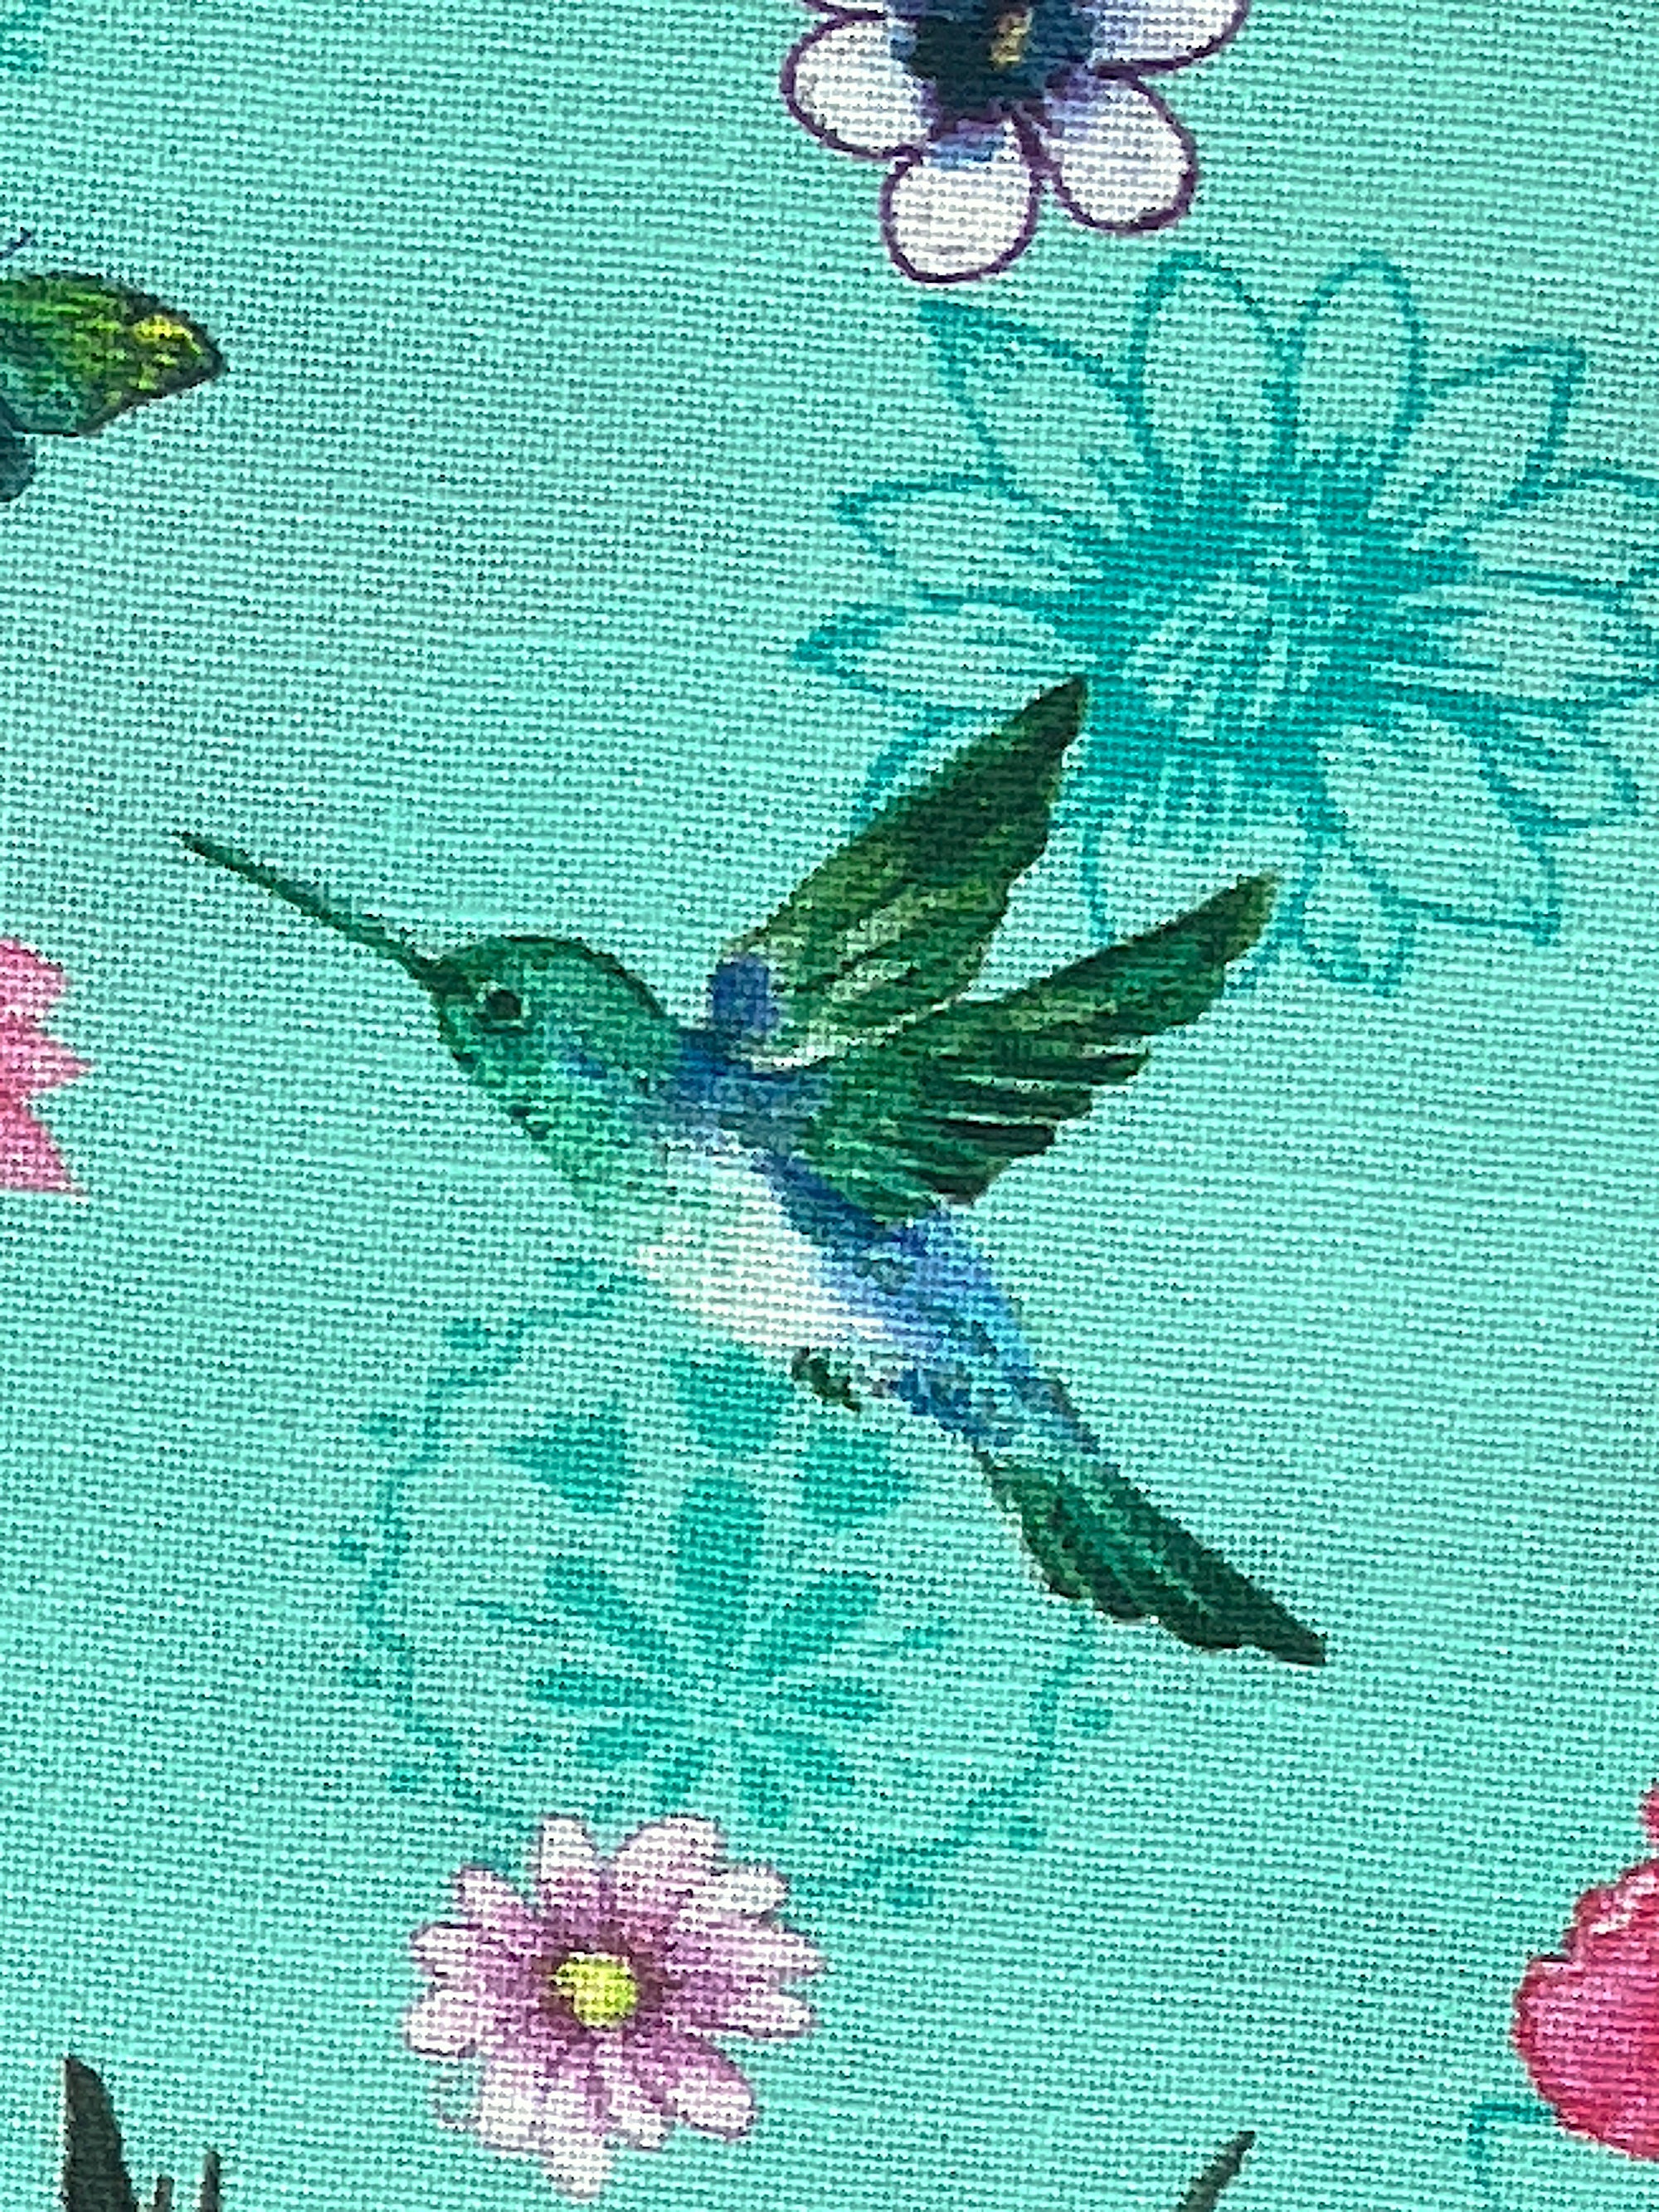 Close up of a blue and green hummingbird.